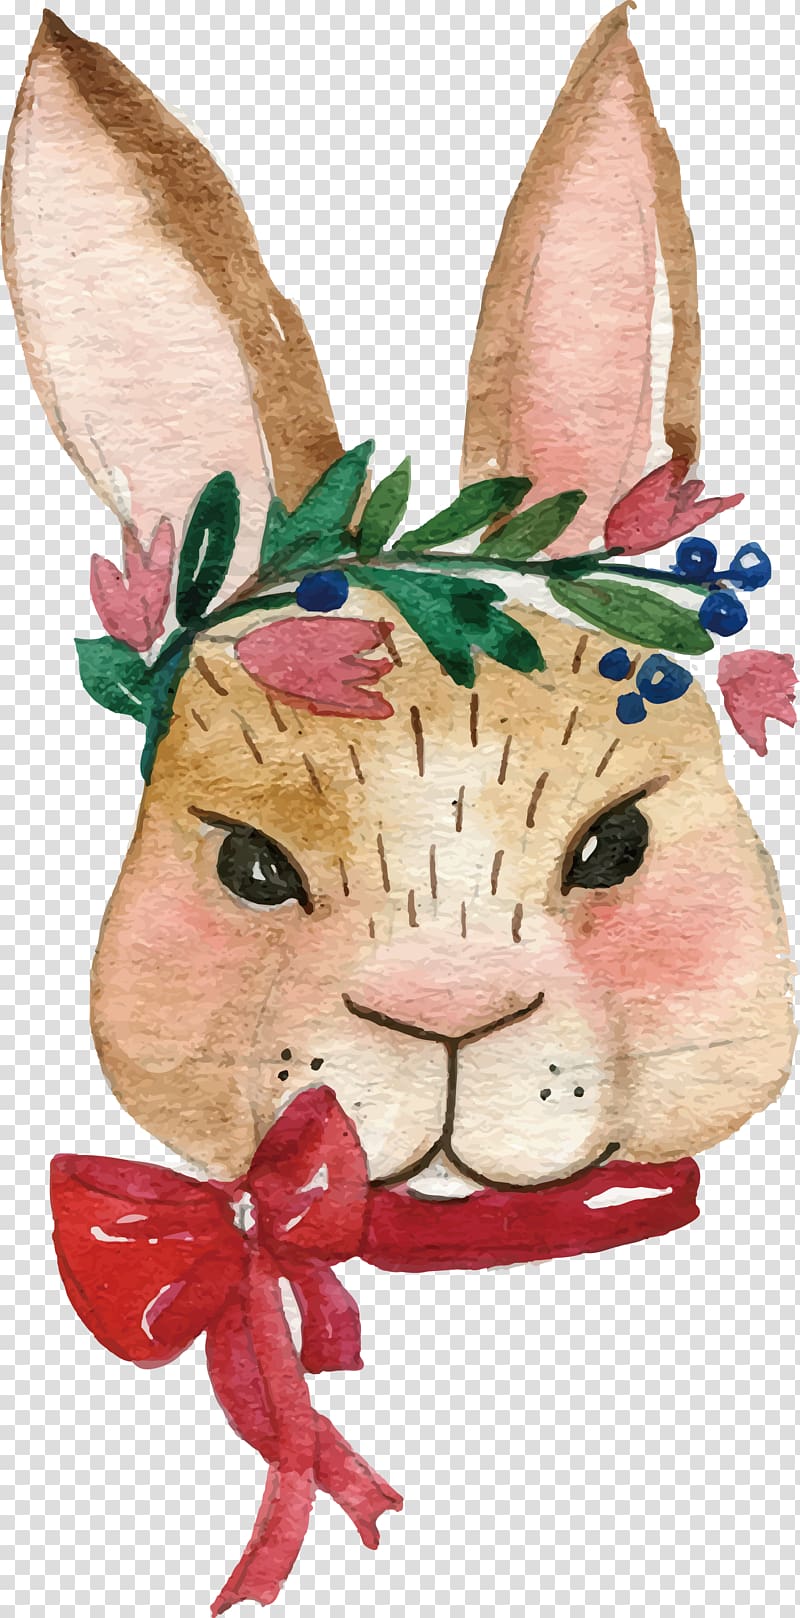 Watercolor painting Rabbit, Watercolor Bunny transparent background PNG clipart